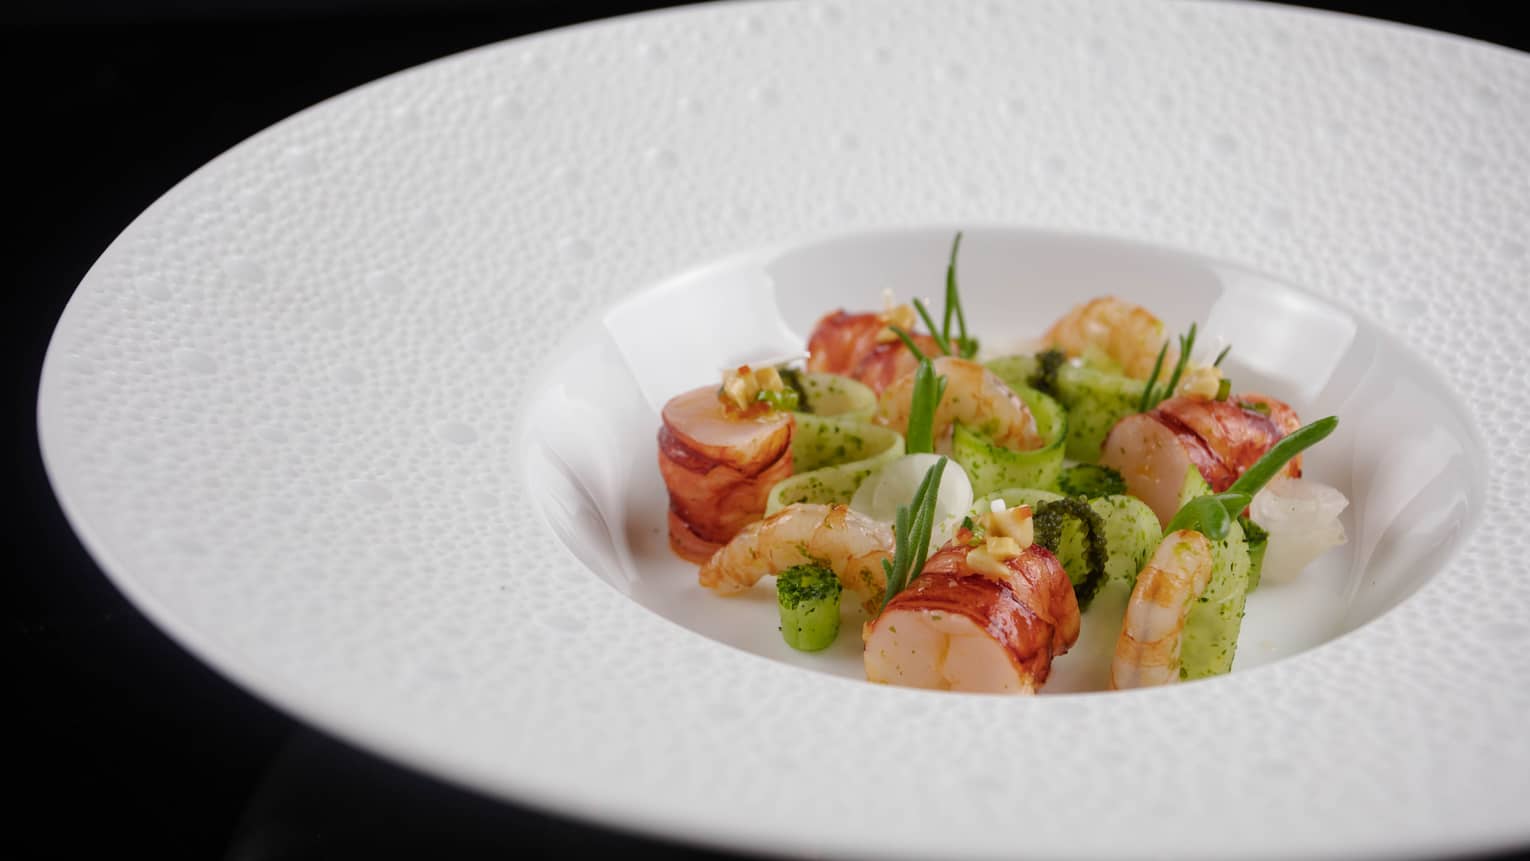 Shrimp pieces and cucumber slices arranged in white dish